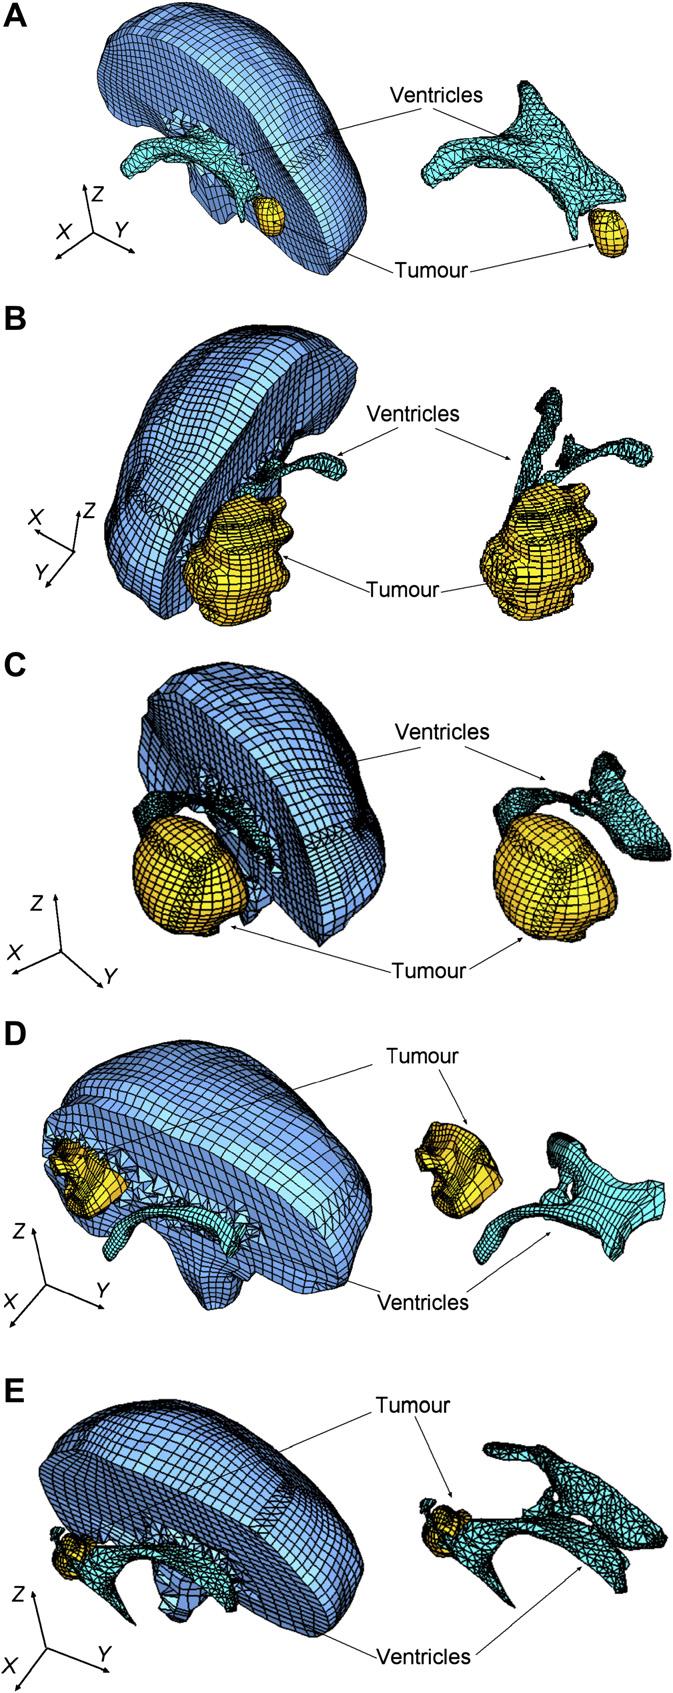 A. Wittek et al. / Progress in Biophysics and Molecular Biology 103 (2010) 292e303 295 analyst to manually build a patient-specific hexahedral mesh of the brain with a tumour.